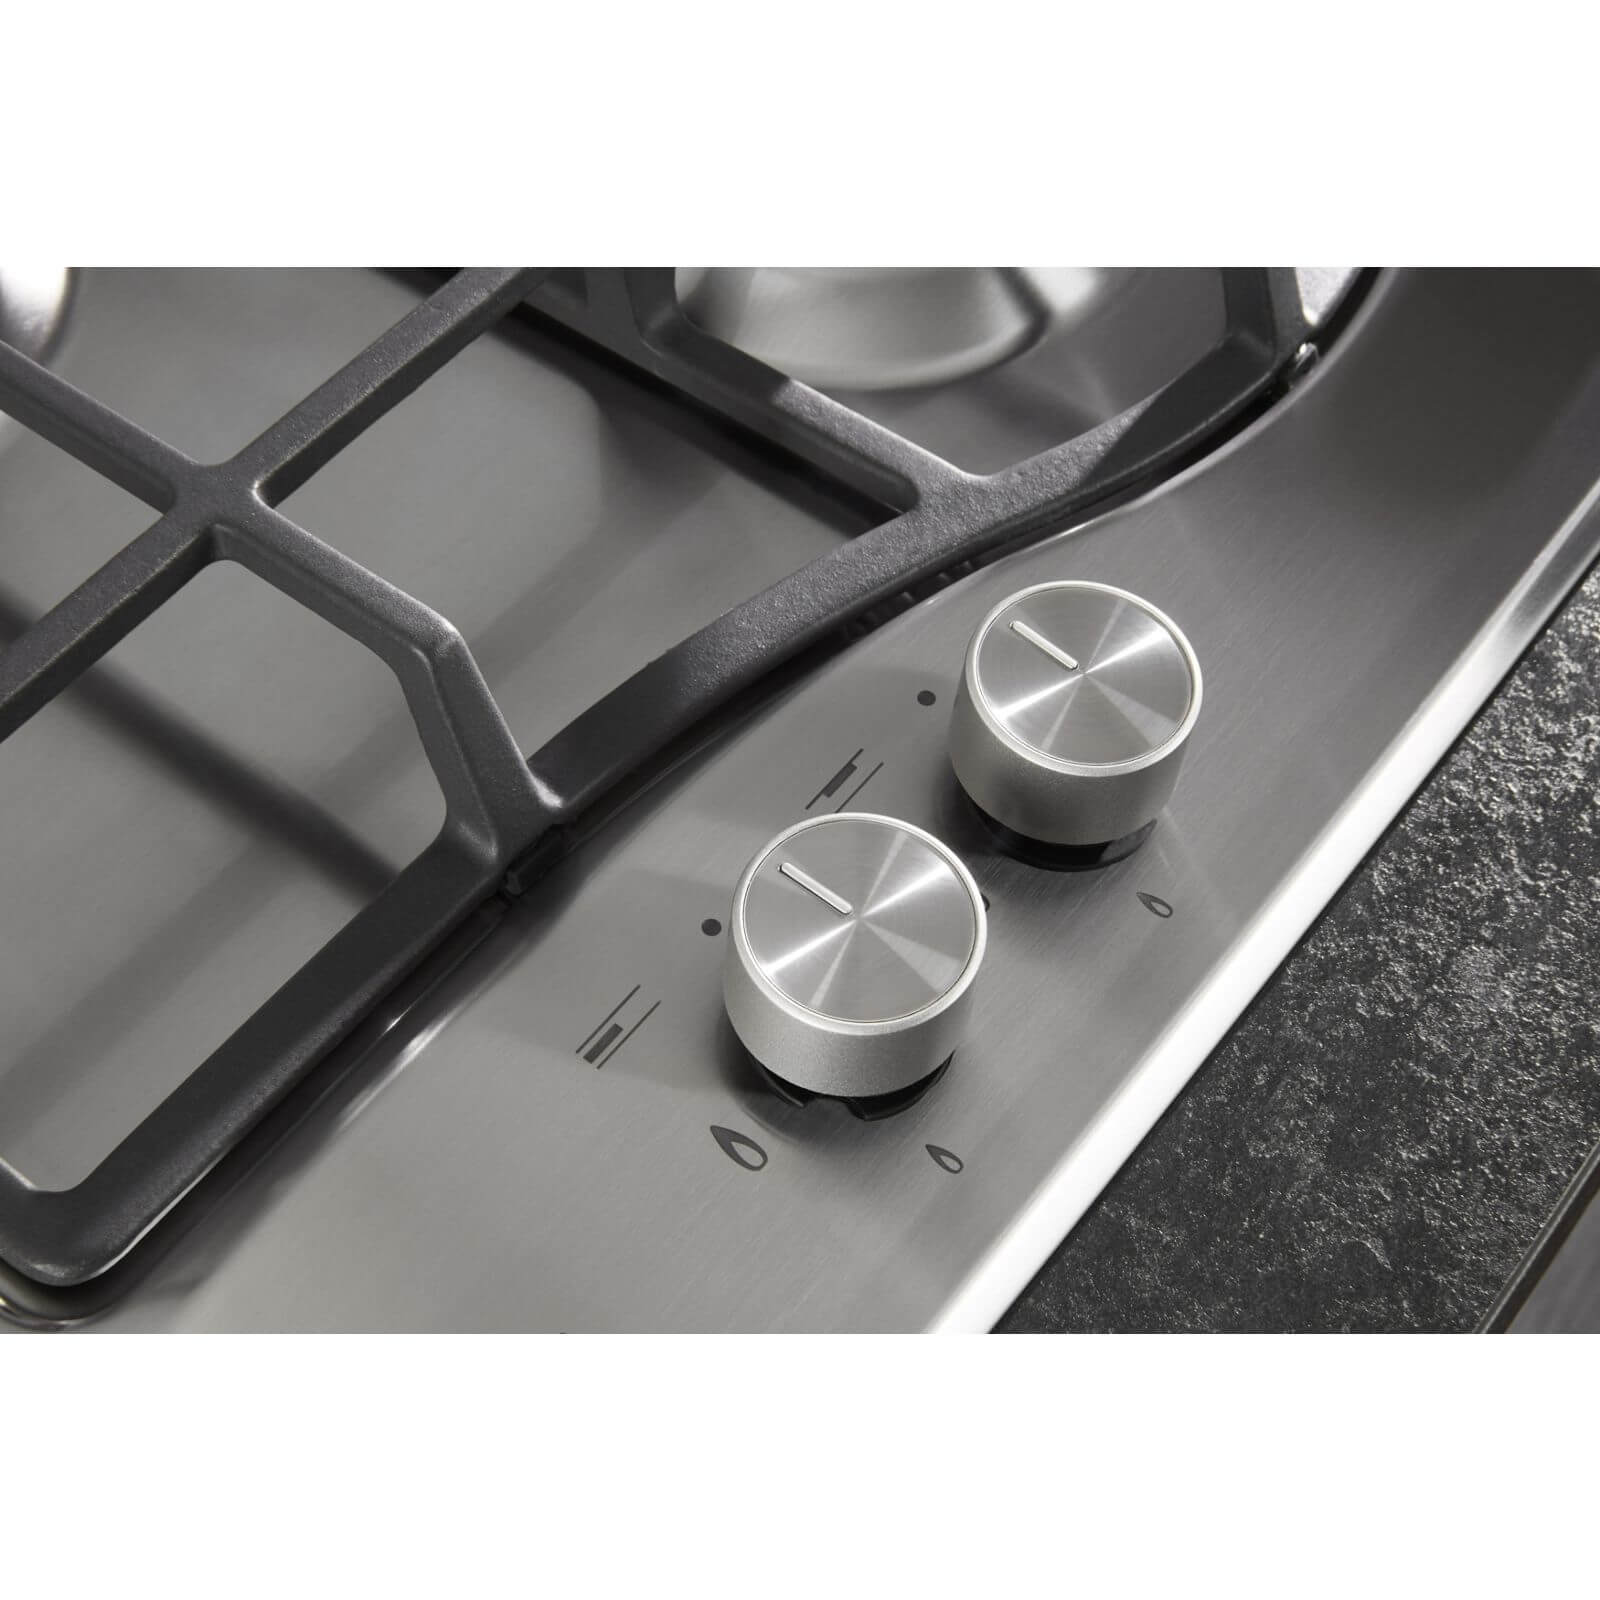 Hotpoint PCN 641 T/IX/H Built-in Gas Hob - Stainless Steel